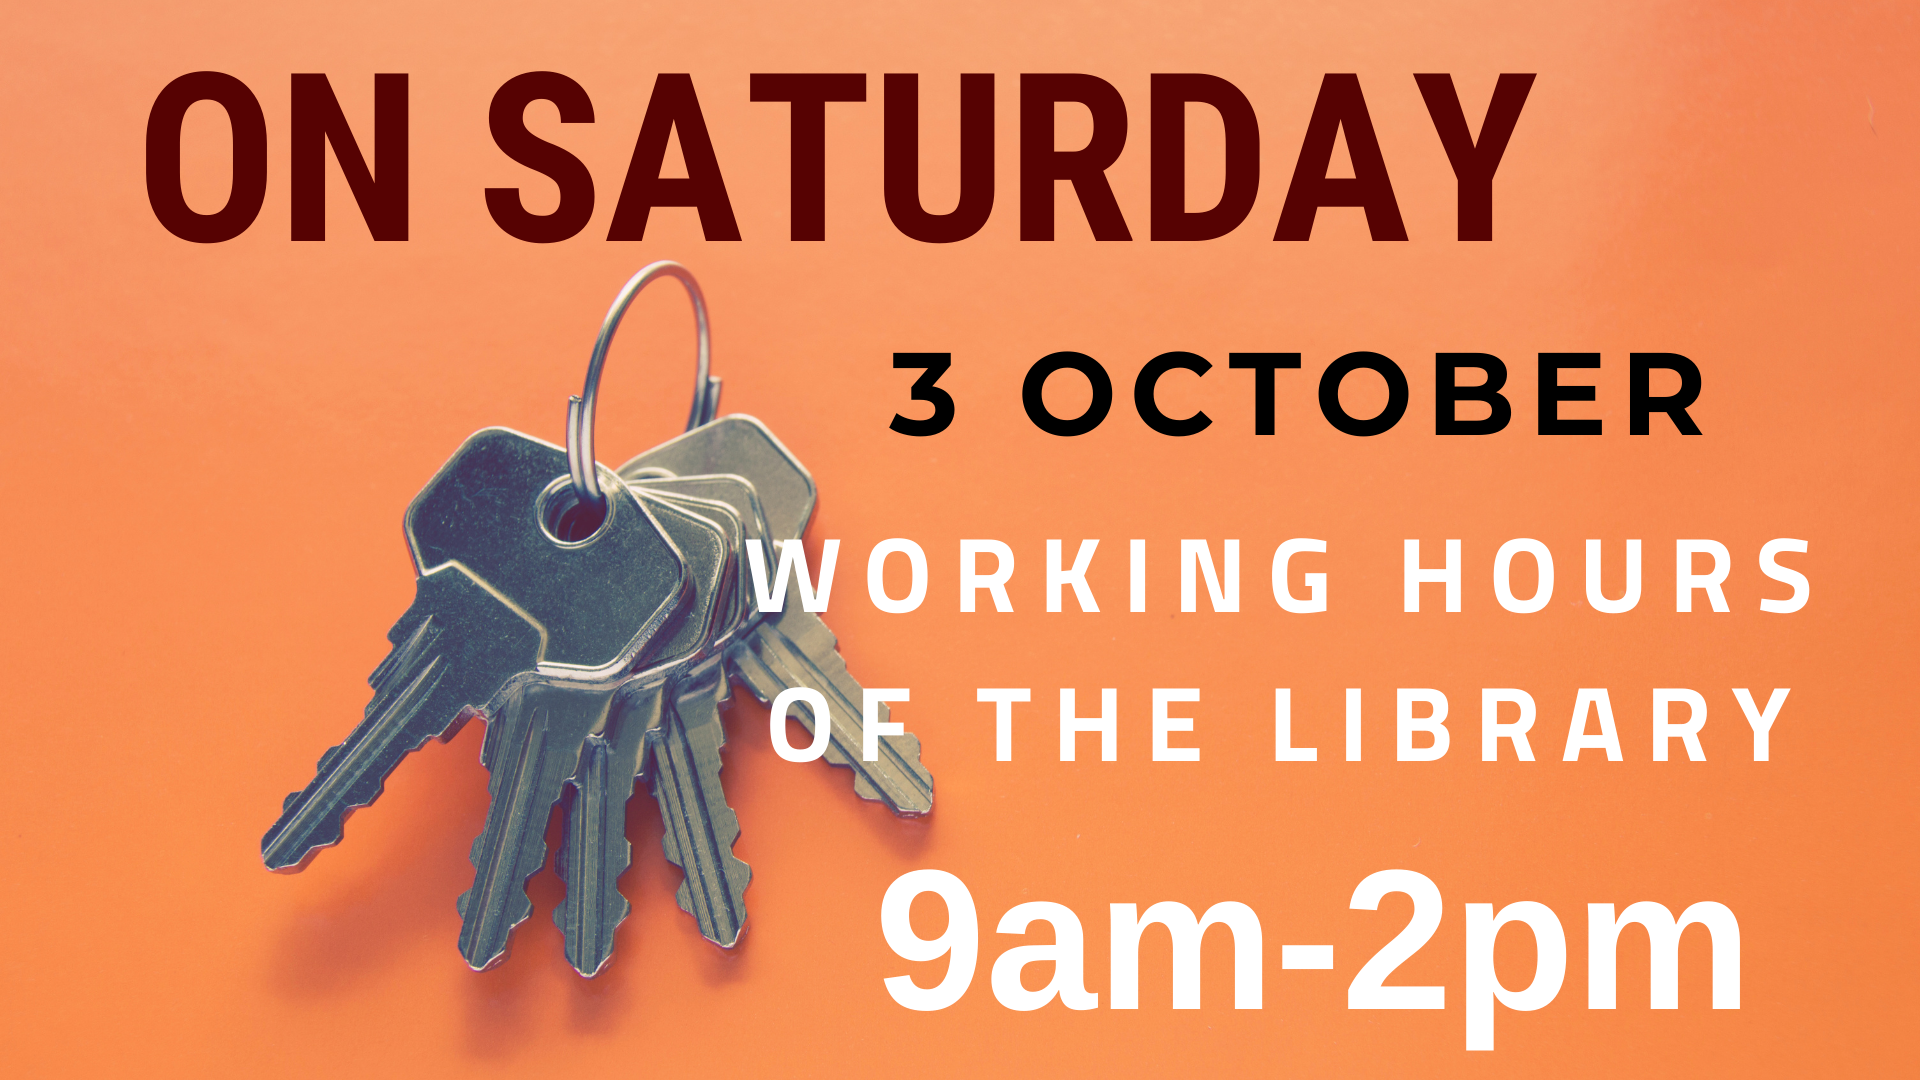 On Saturday 3 October our library is open from 9am until 2pm